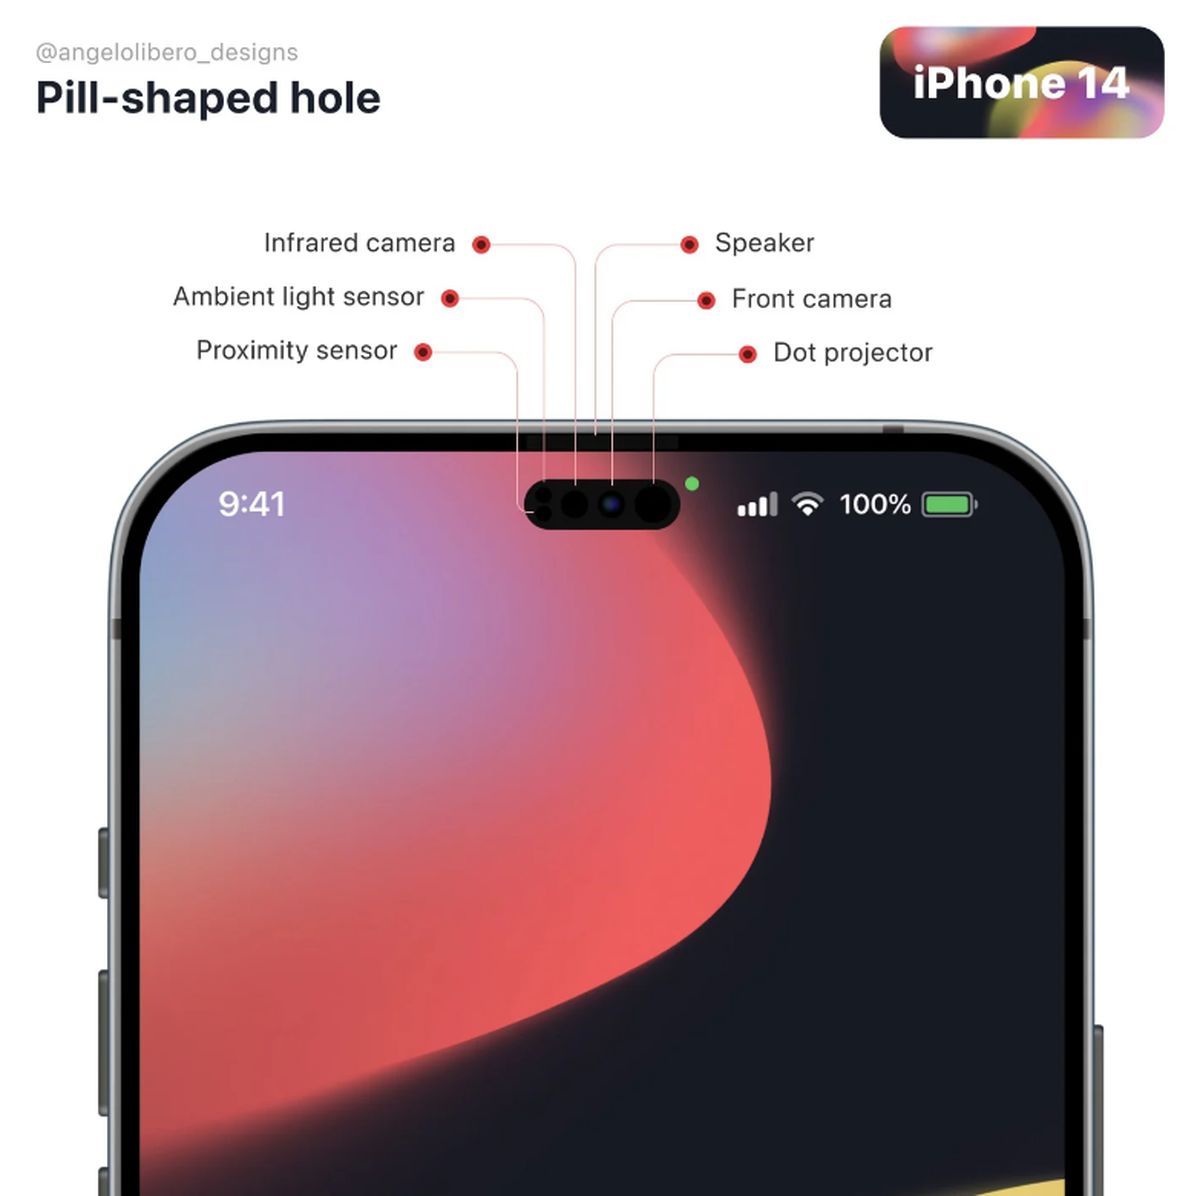 iPhone 14 - Without notch